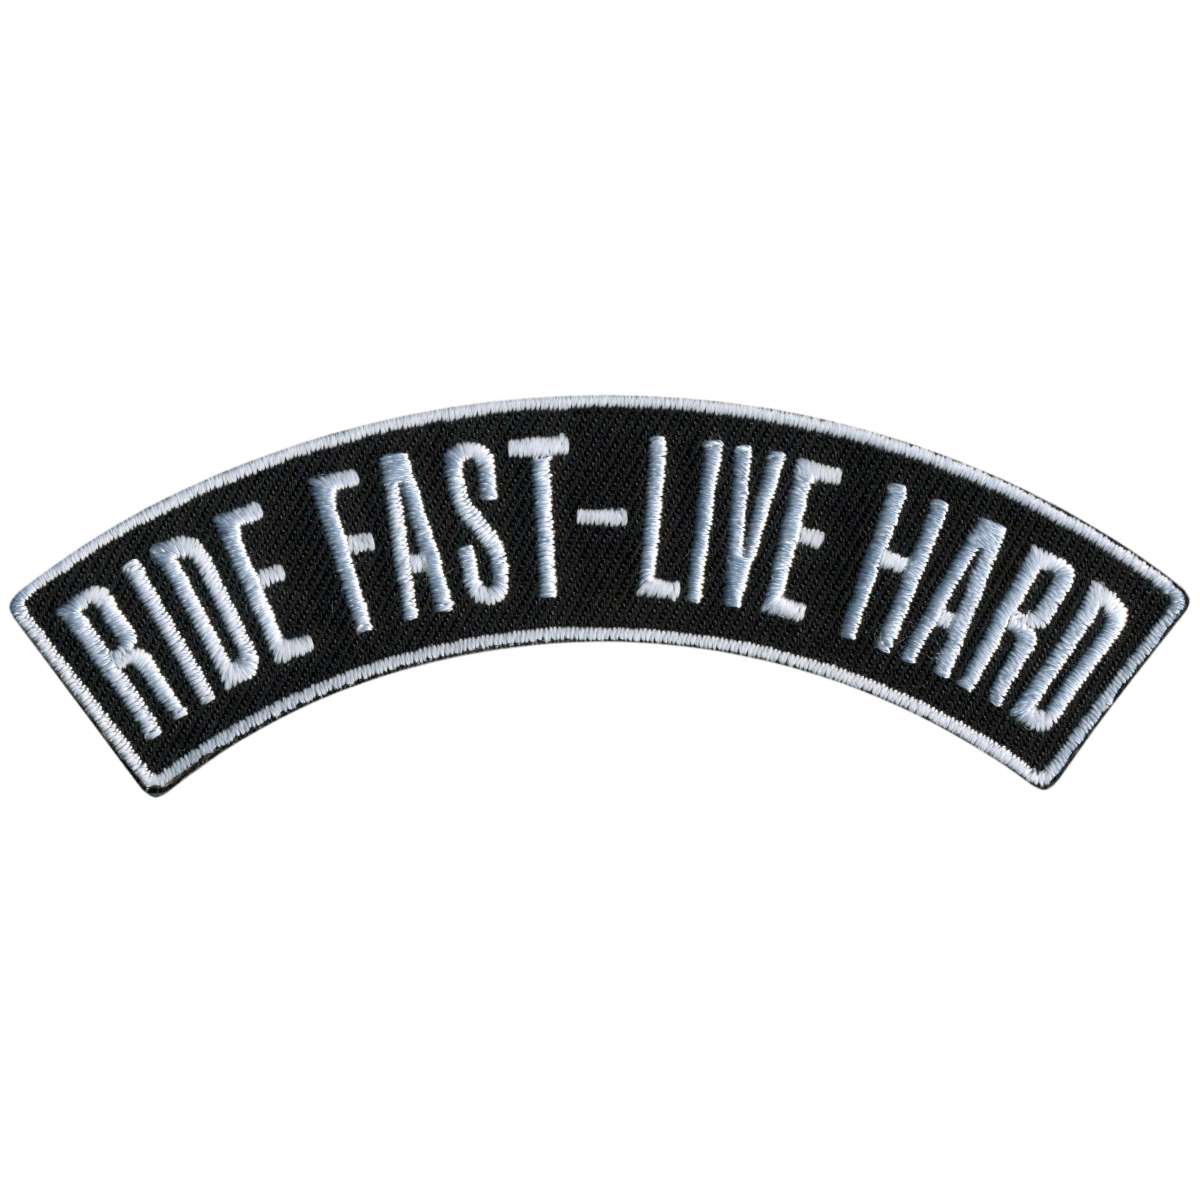 Hot Leathers Ride Fast - Live Hard 4” X 1” Top Rocker Patch PPM4204